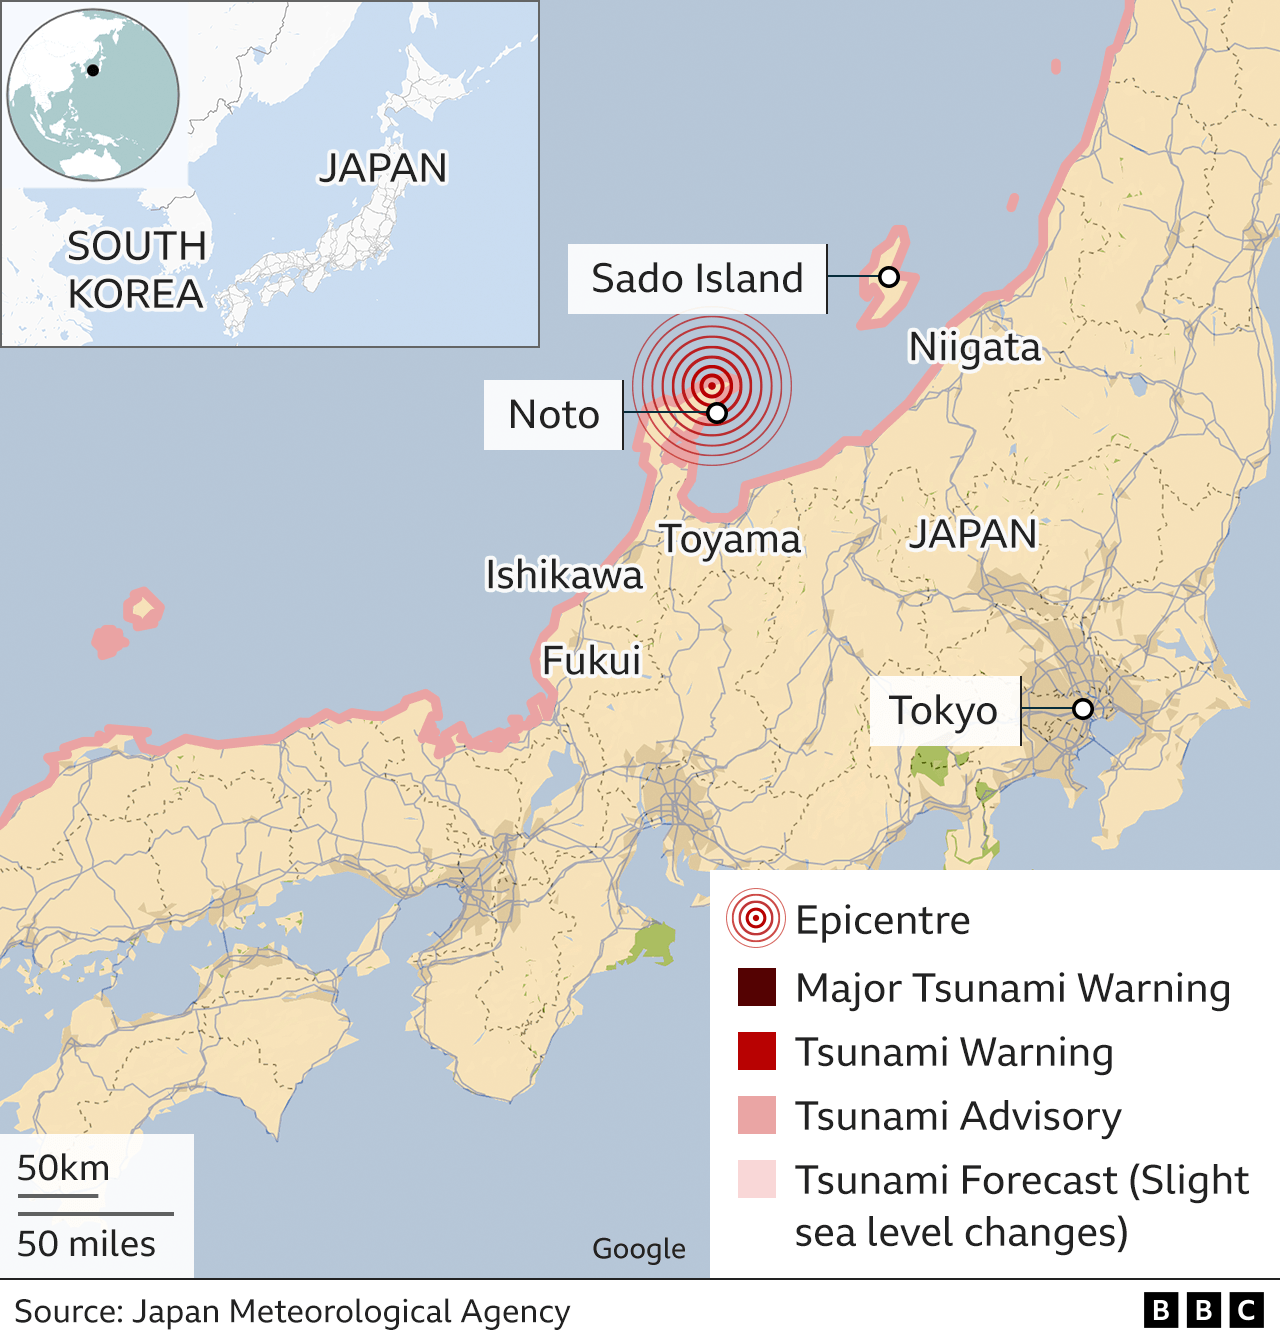 A map of Japan shows affected areas along the north coastline of the country's central area, where tsunami advisories are in place. Marked on the map are Fukui, Ishikawa, Noto, Toyama, Sado Island and Niigata